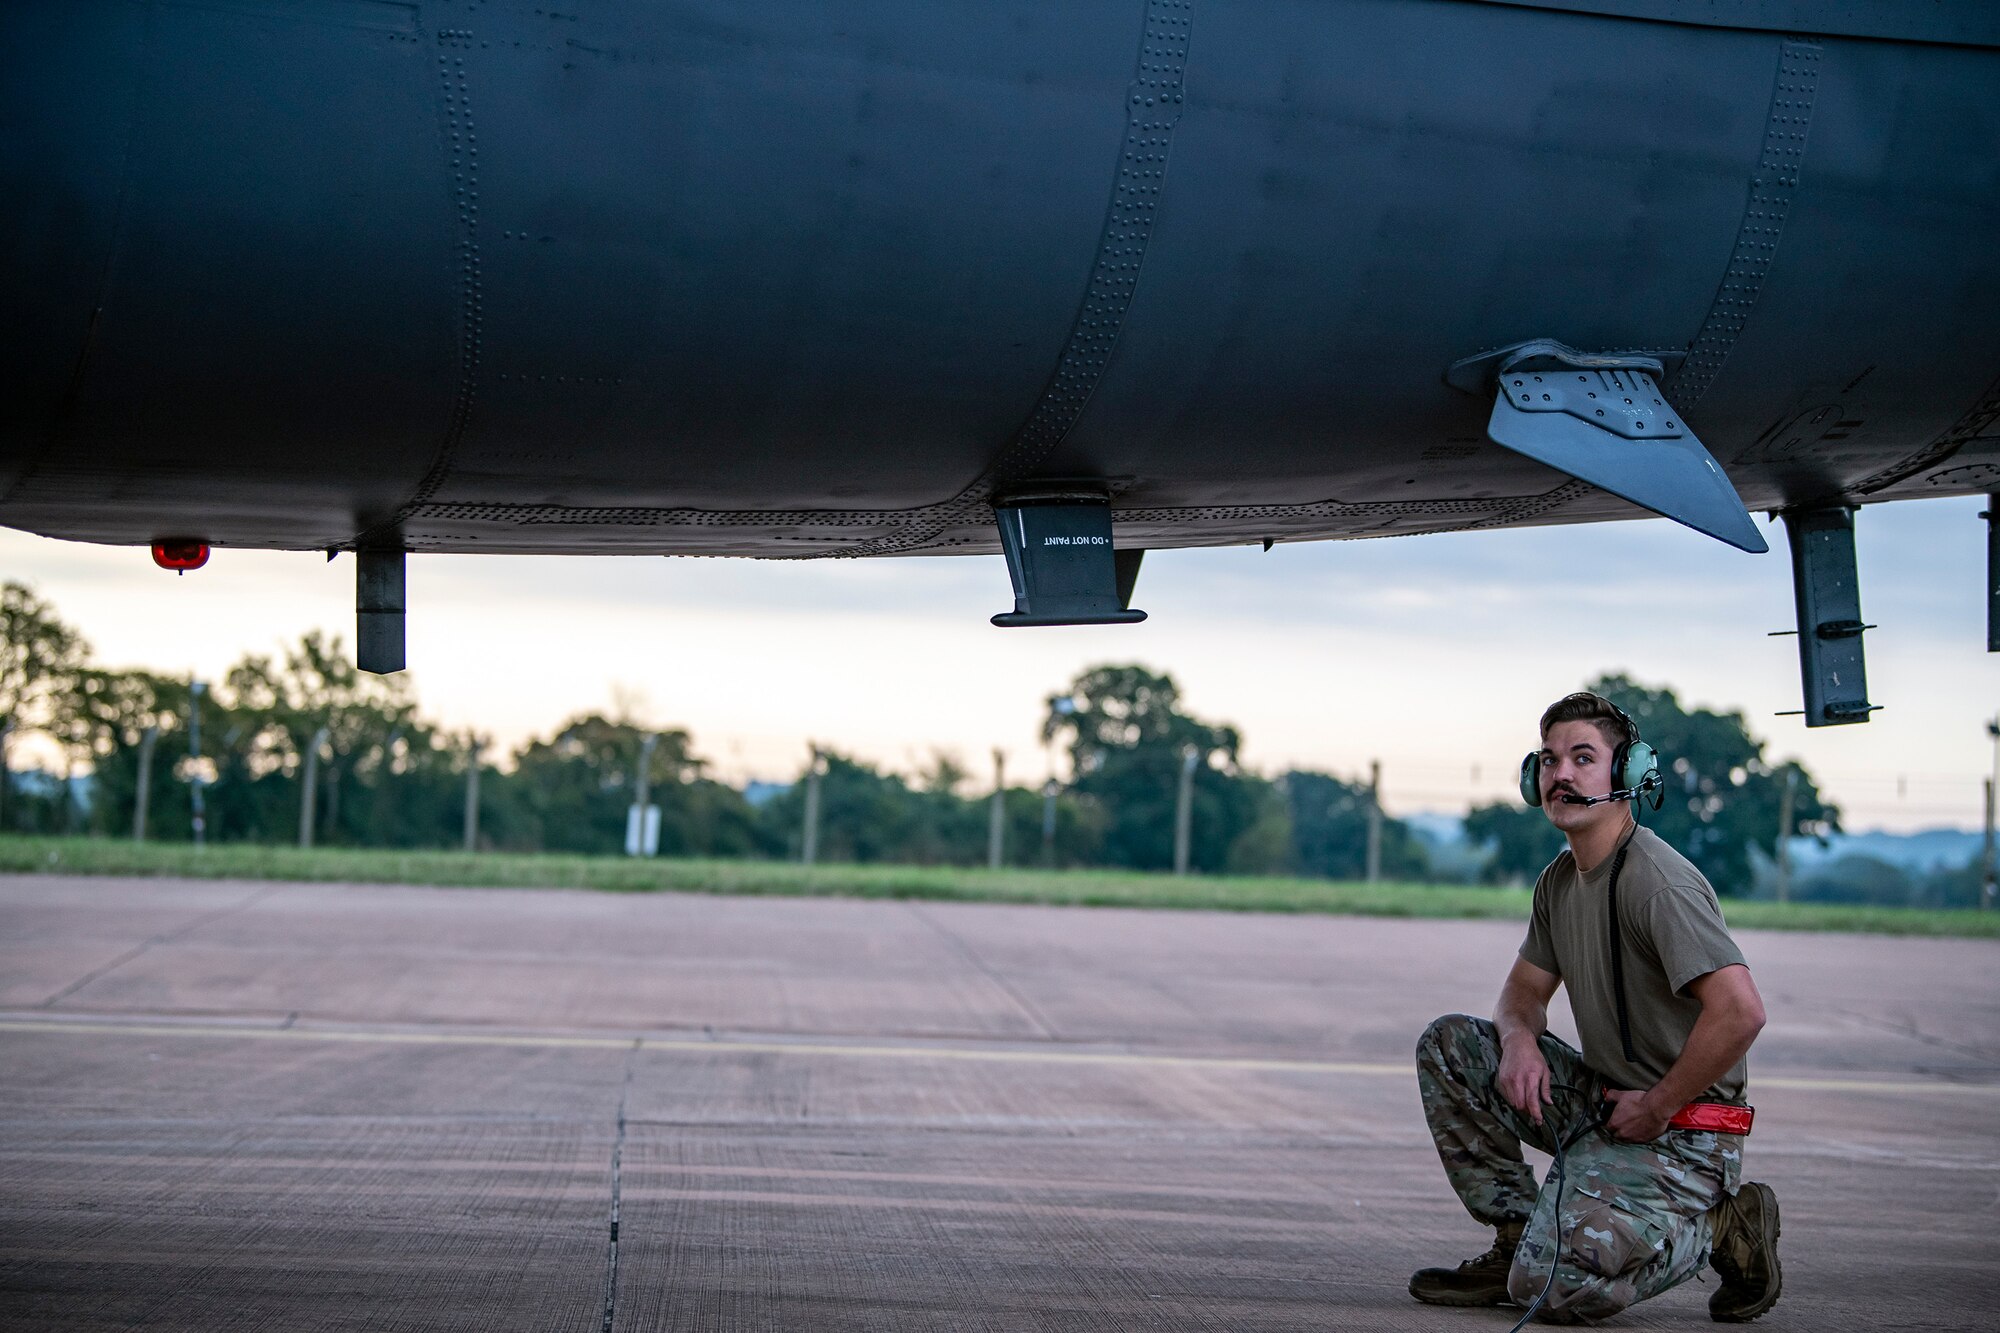 An Airman from the 23rd Aircraft Maintenance Unit, inspects the underbelly of a B-52 Stratofortress aircraft assigned to the 23rd Expeditionary Bomb Squadron at RAF Fairford, United Kingdom, Sept. 21, 2022 Dozens of Airmen supported the Bomber Task Force mission which was intended to deter adversaries, assure allies and partners, strengthen interoperability, maintain and demonstrate readiness and lethality. (U.S. Air Force photo by Staff Sgt. Eugene Oliver)